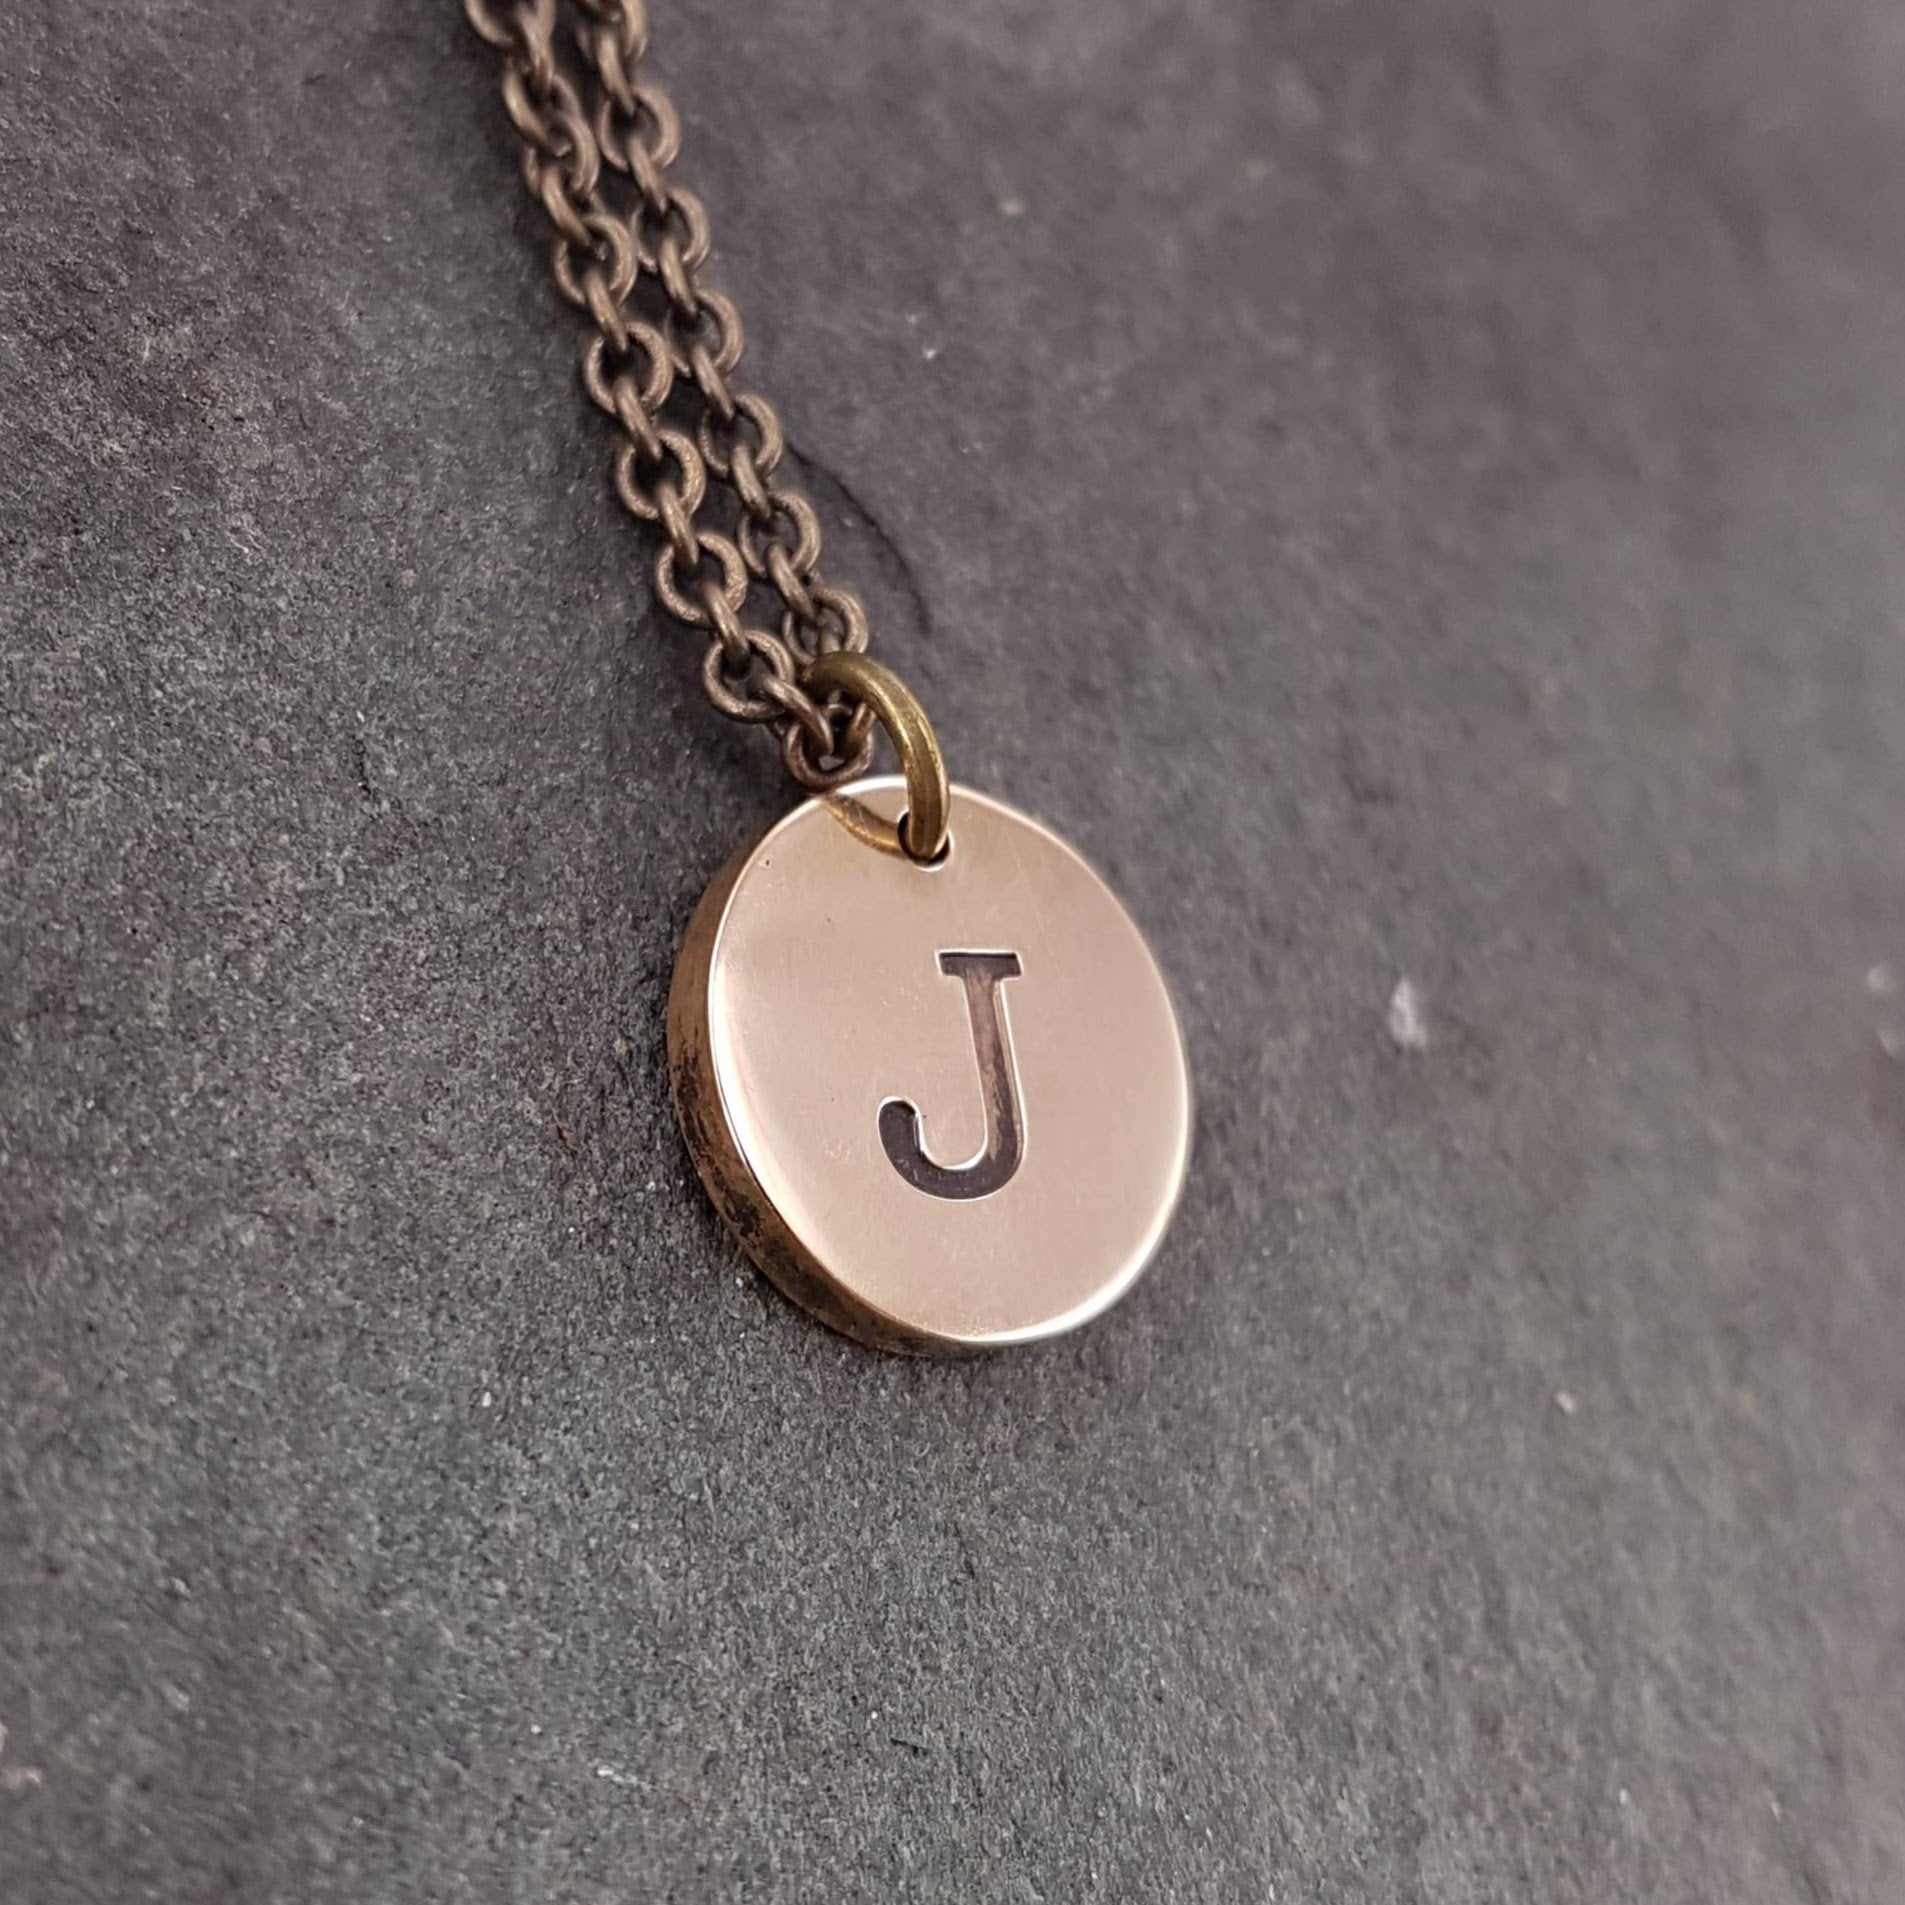 Engraved Initial Charm Necklace - Solid Bronze Monogram Pendant - Personalized Symbol Necklace - Gold Letter Necklace Gift for her - Gwen Delicious Jewelry Designs